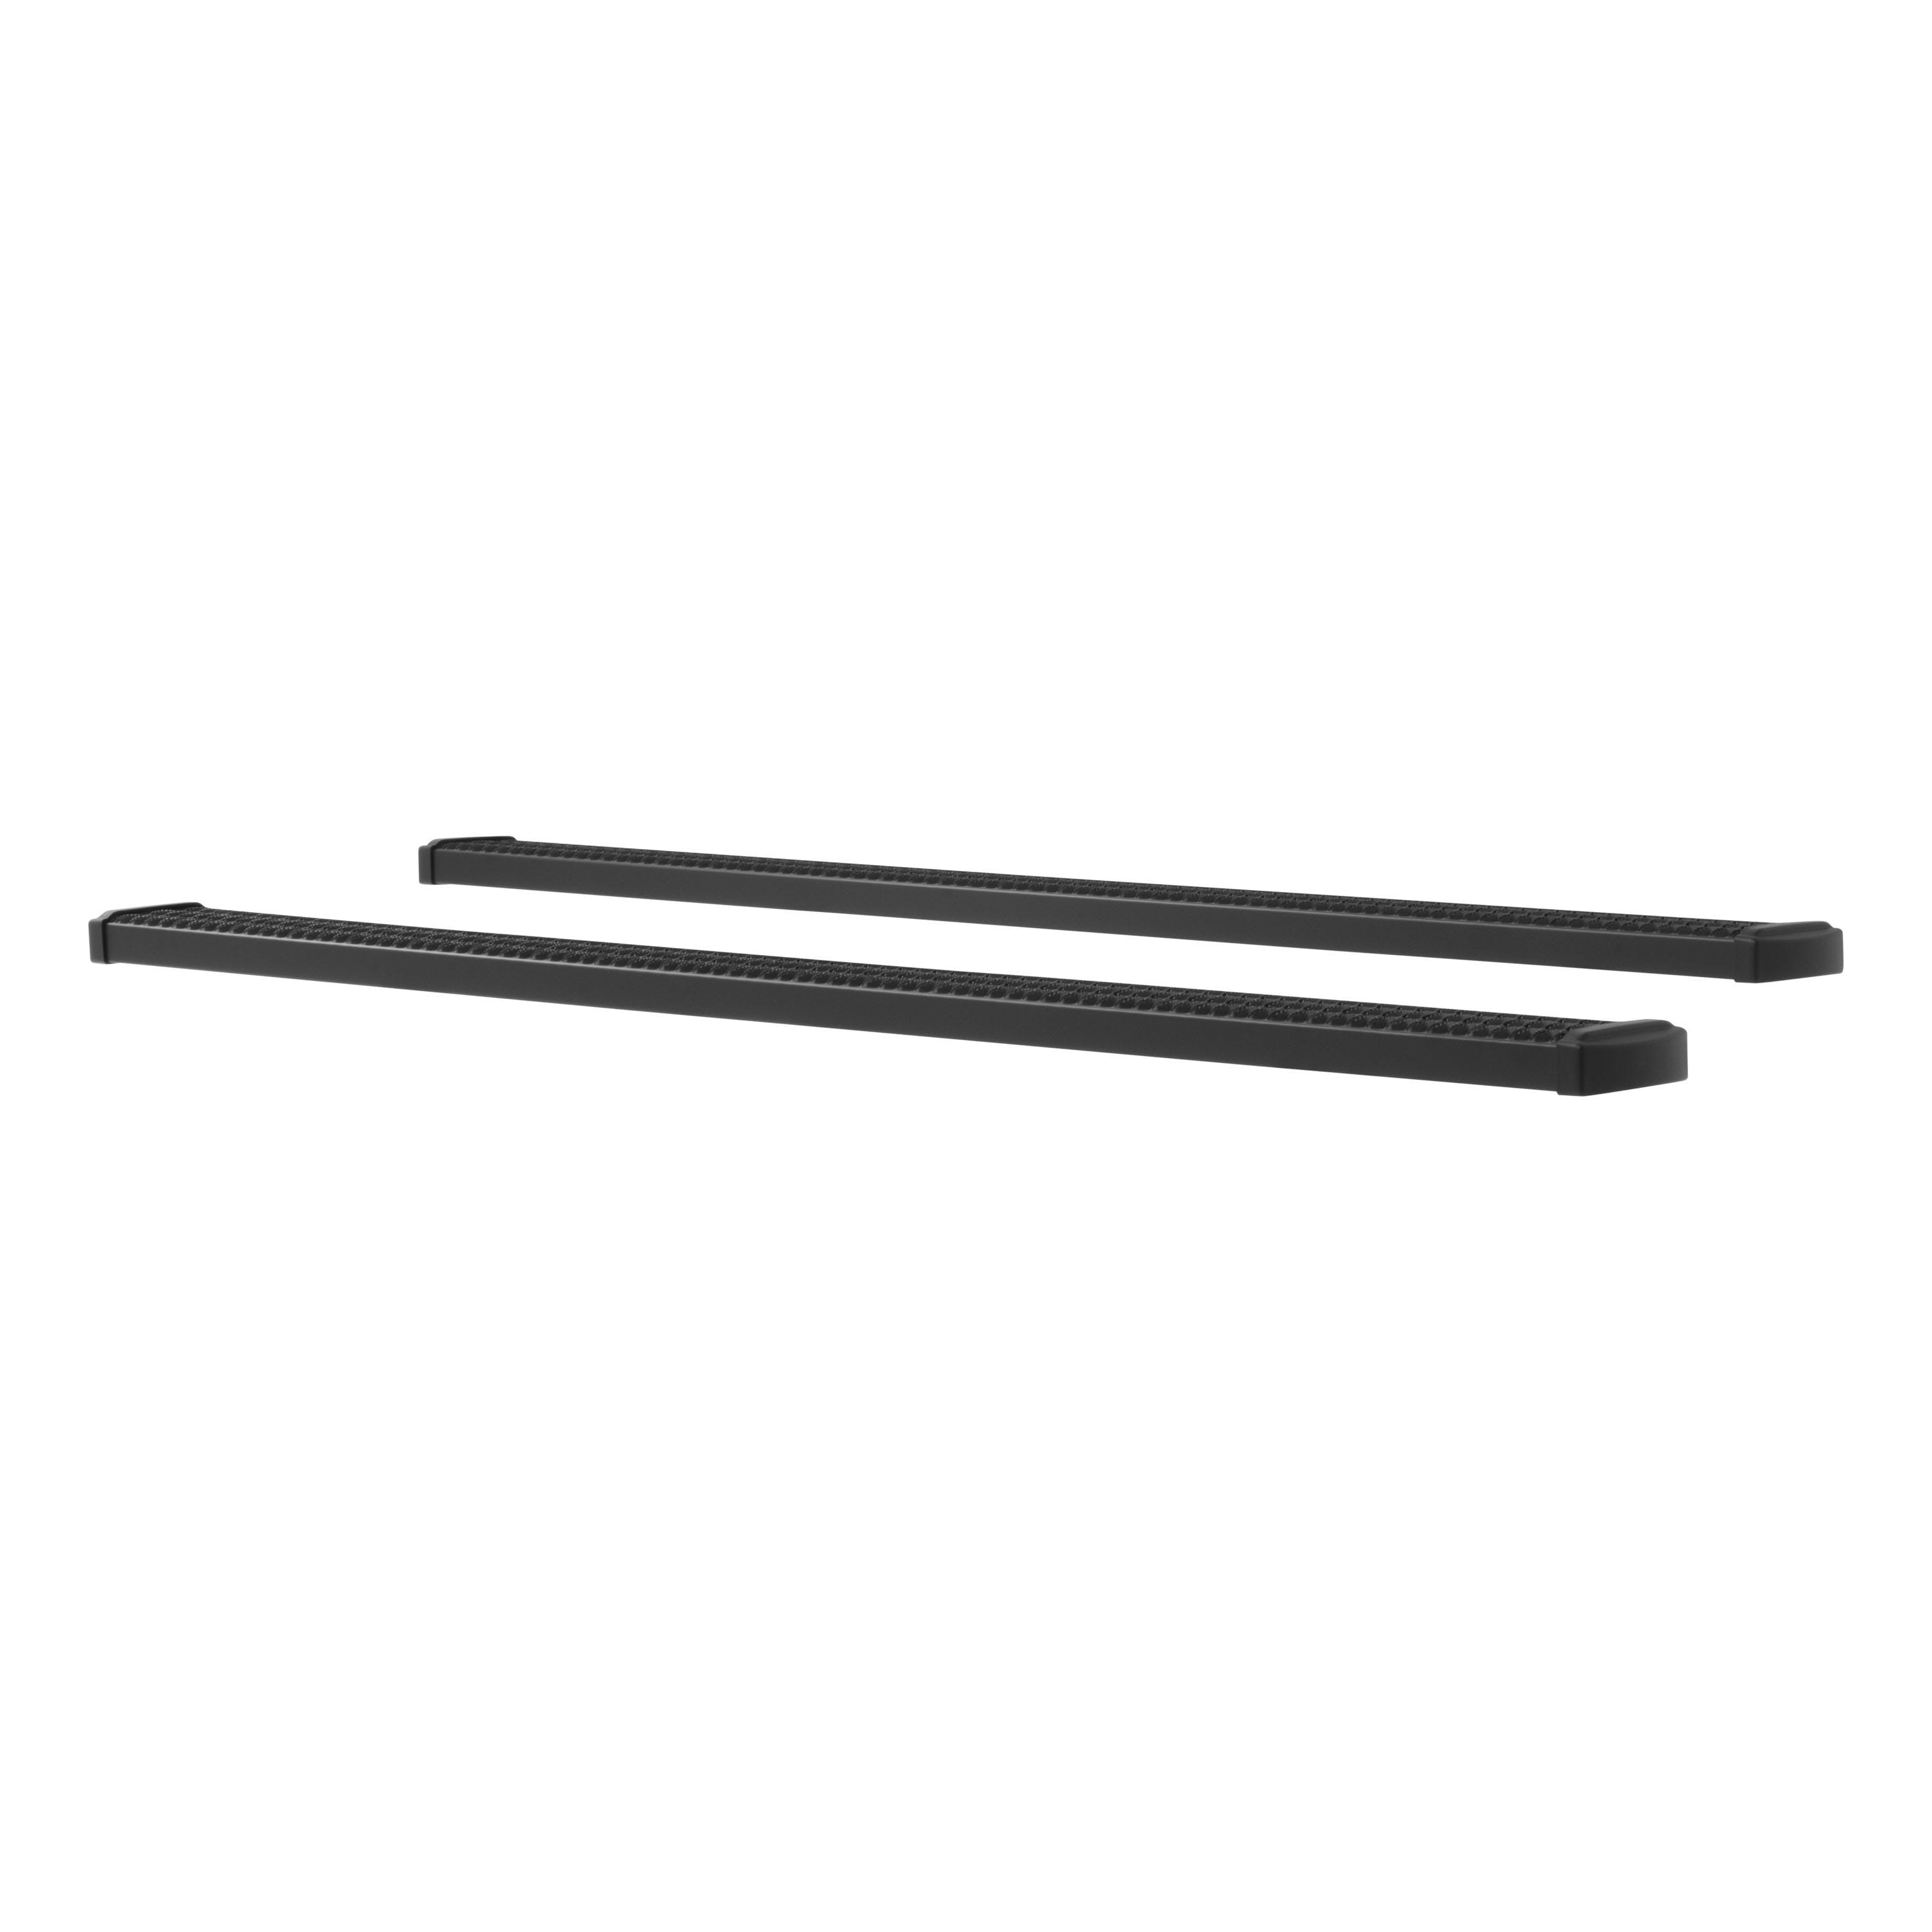 LUVERNE 415098-401339 Grip Step 7 inch Running Boards